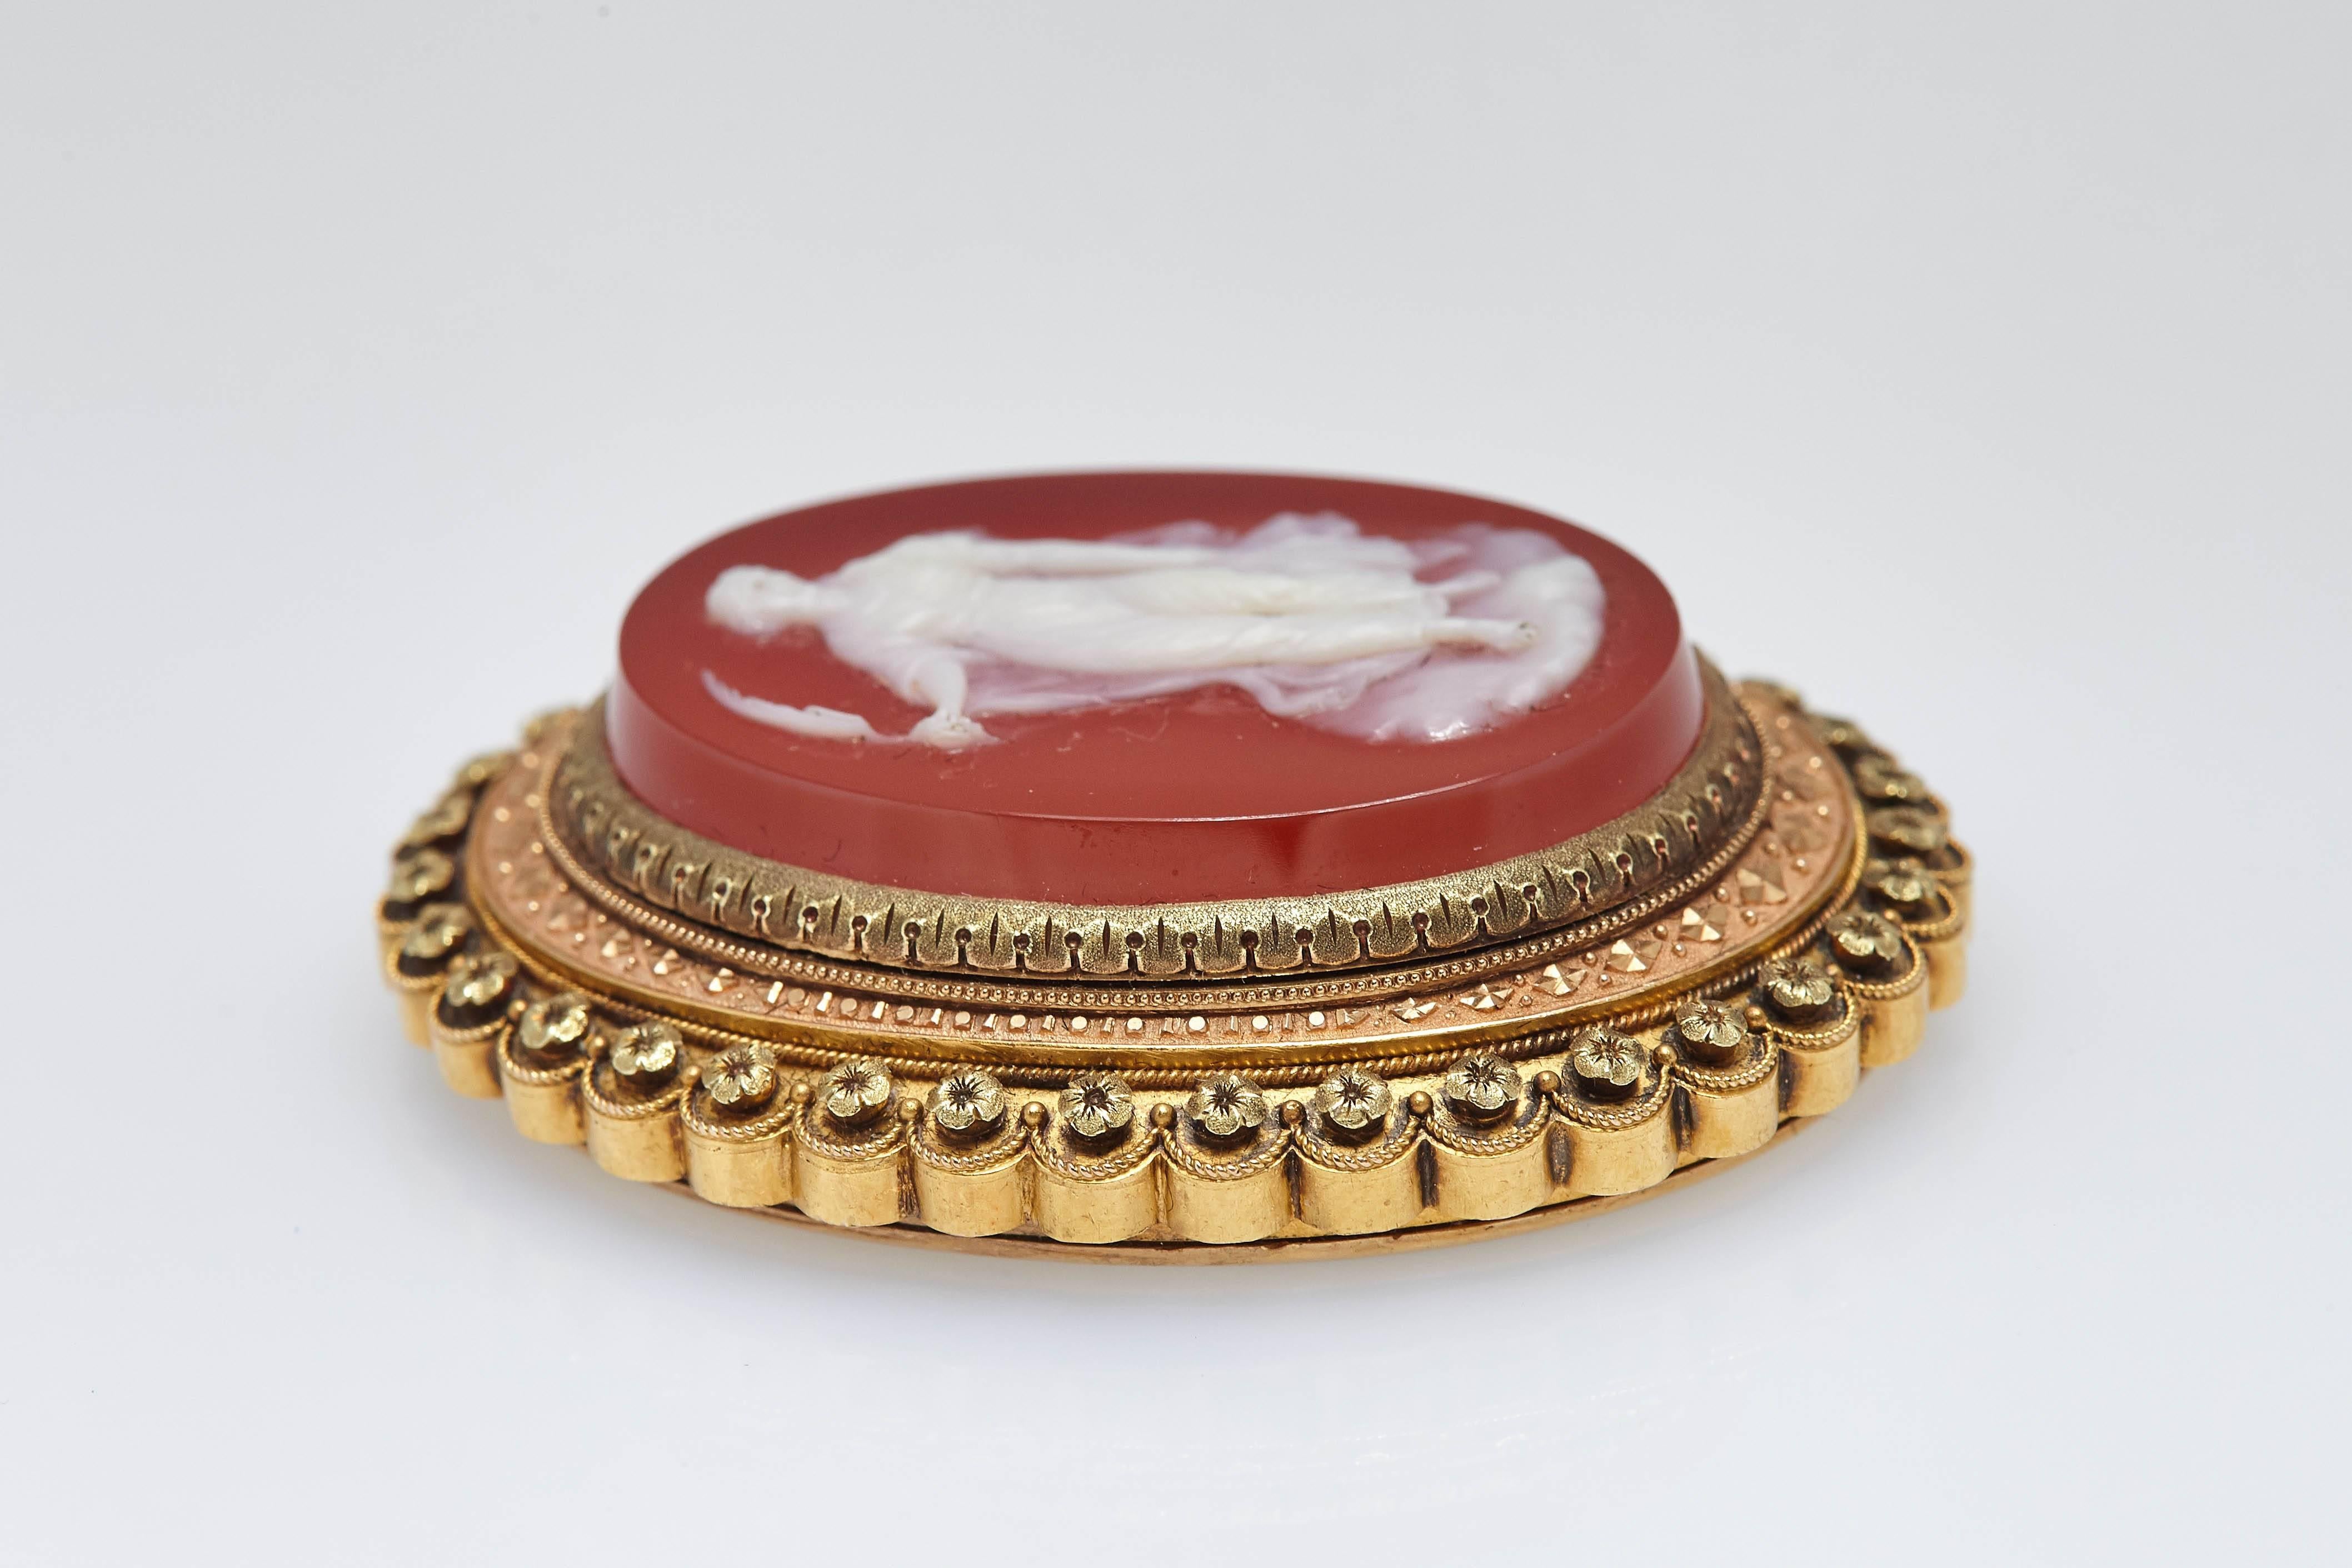 A refined antique agate cameo brooch mounted on gold, representing a female figure. Made in Southern Italy, circa 1880. 